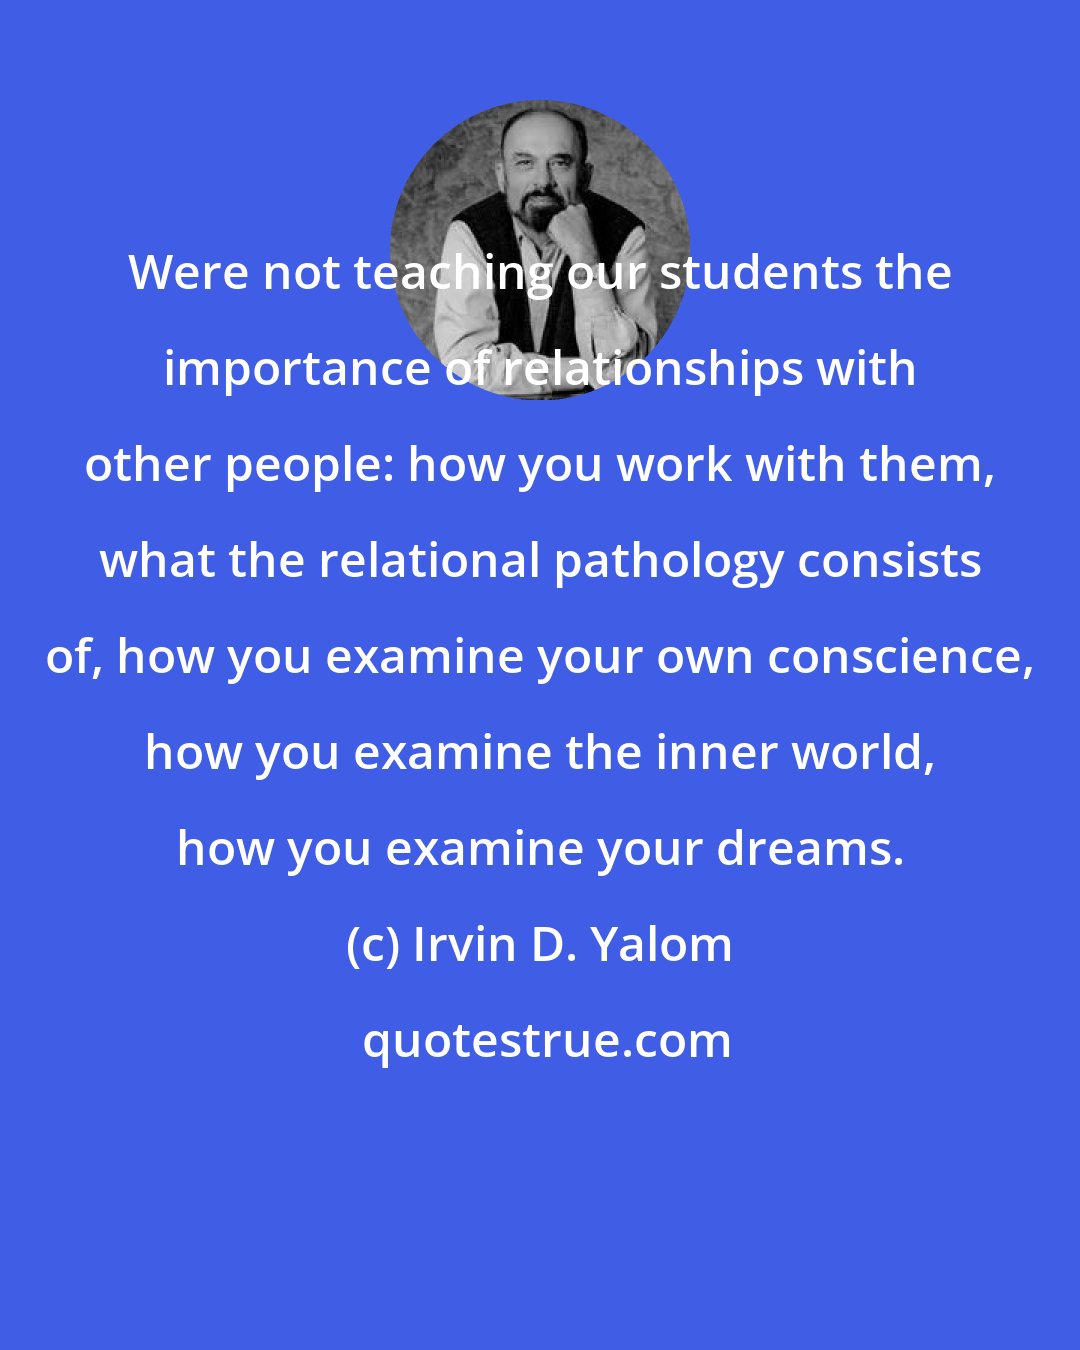 Irvin D. Yalom: Were not teaching our students the importance of relationships with other people: how you work with them, what the relational pathology consists of, how you examine your own conscience, how you examine the inner world, how you examine your dreams.